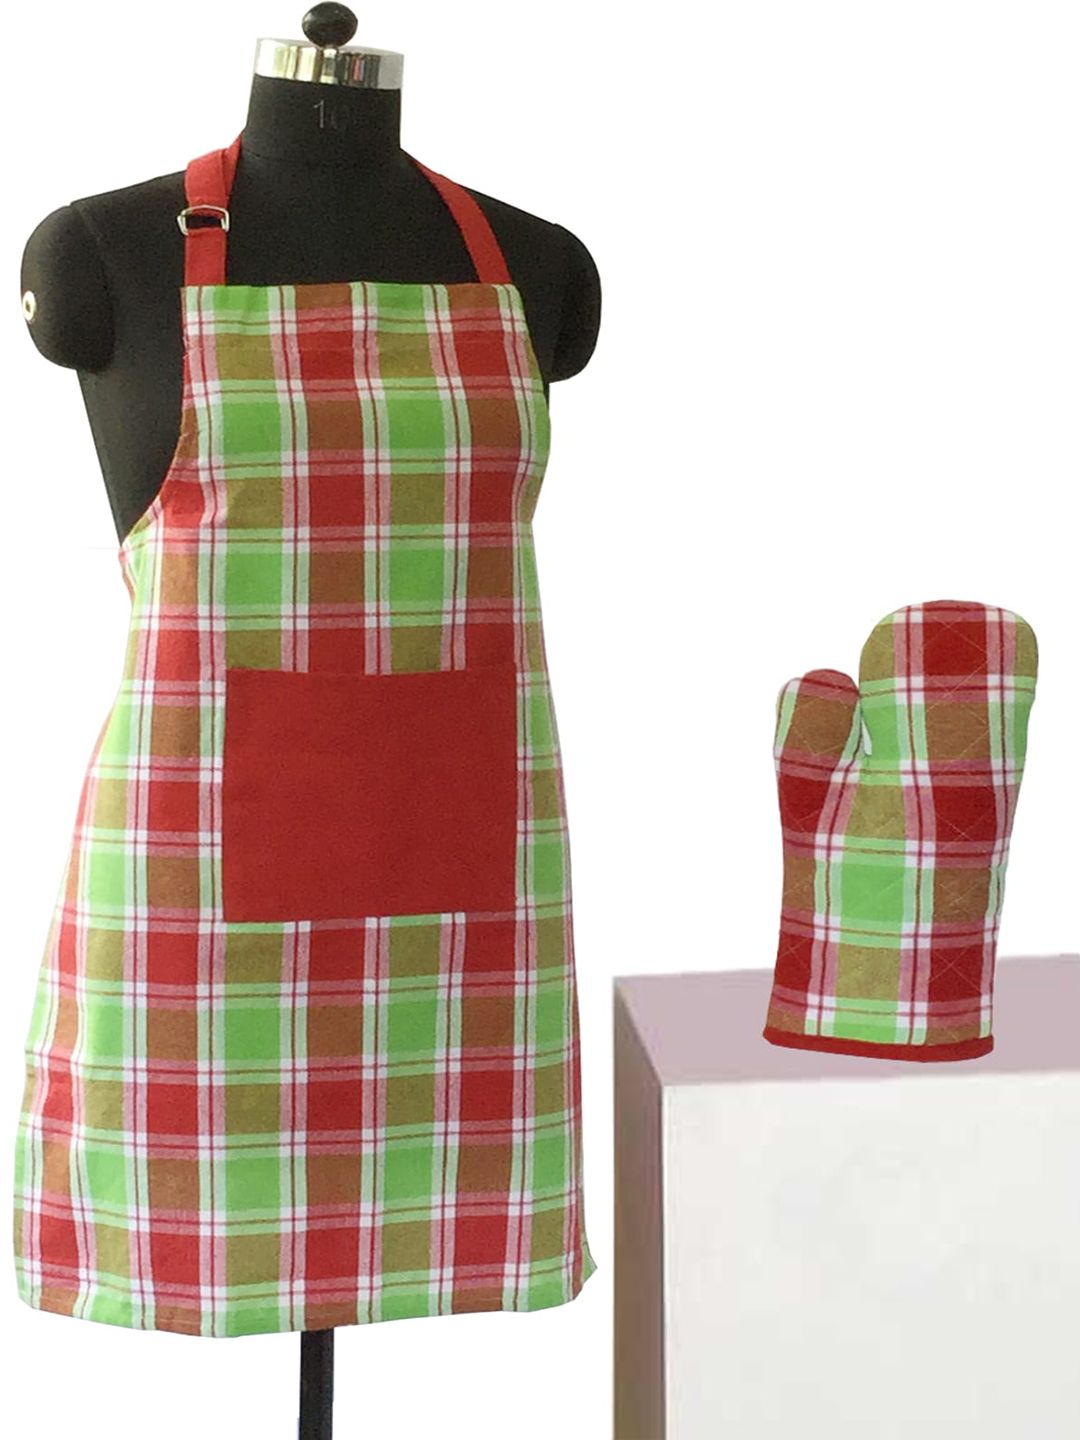 Lushomes Red Checked Cotton Apron With Kitchen Gloves Price in India